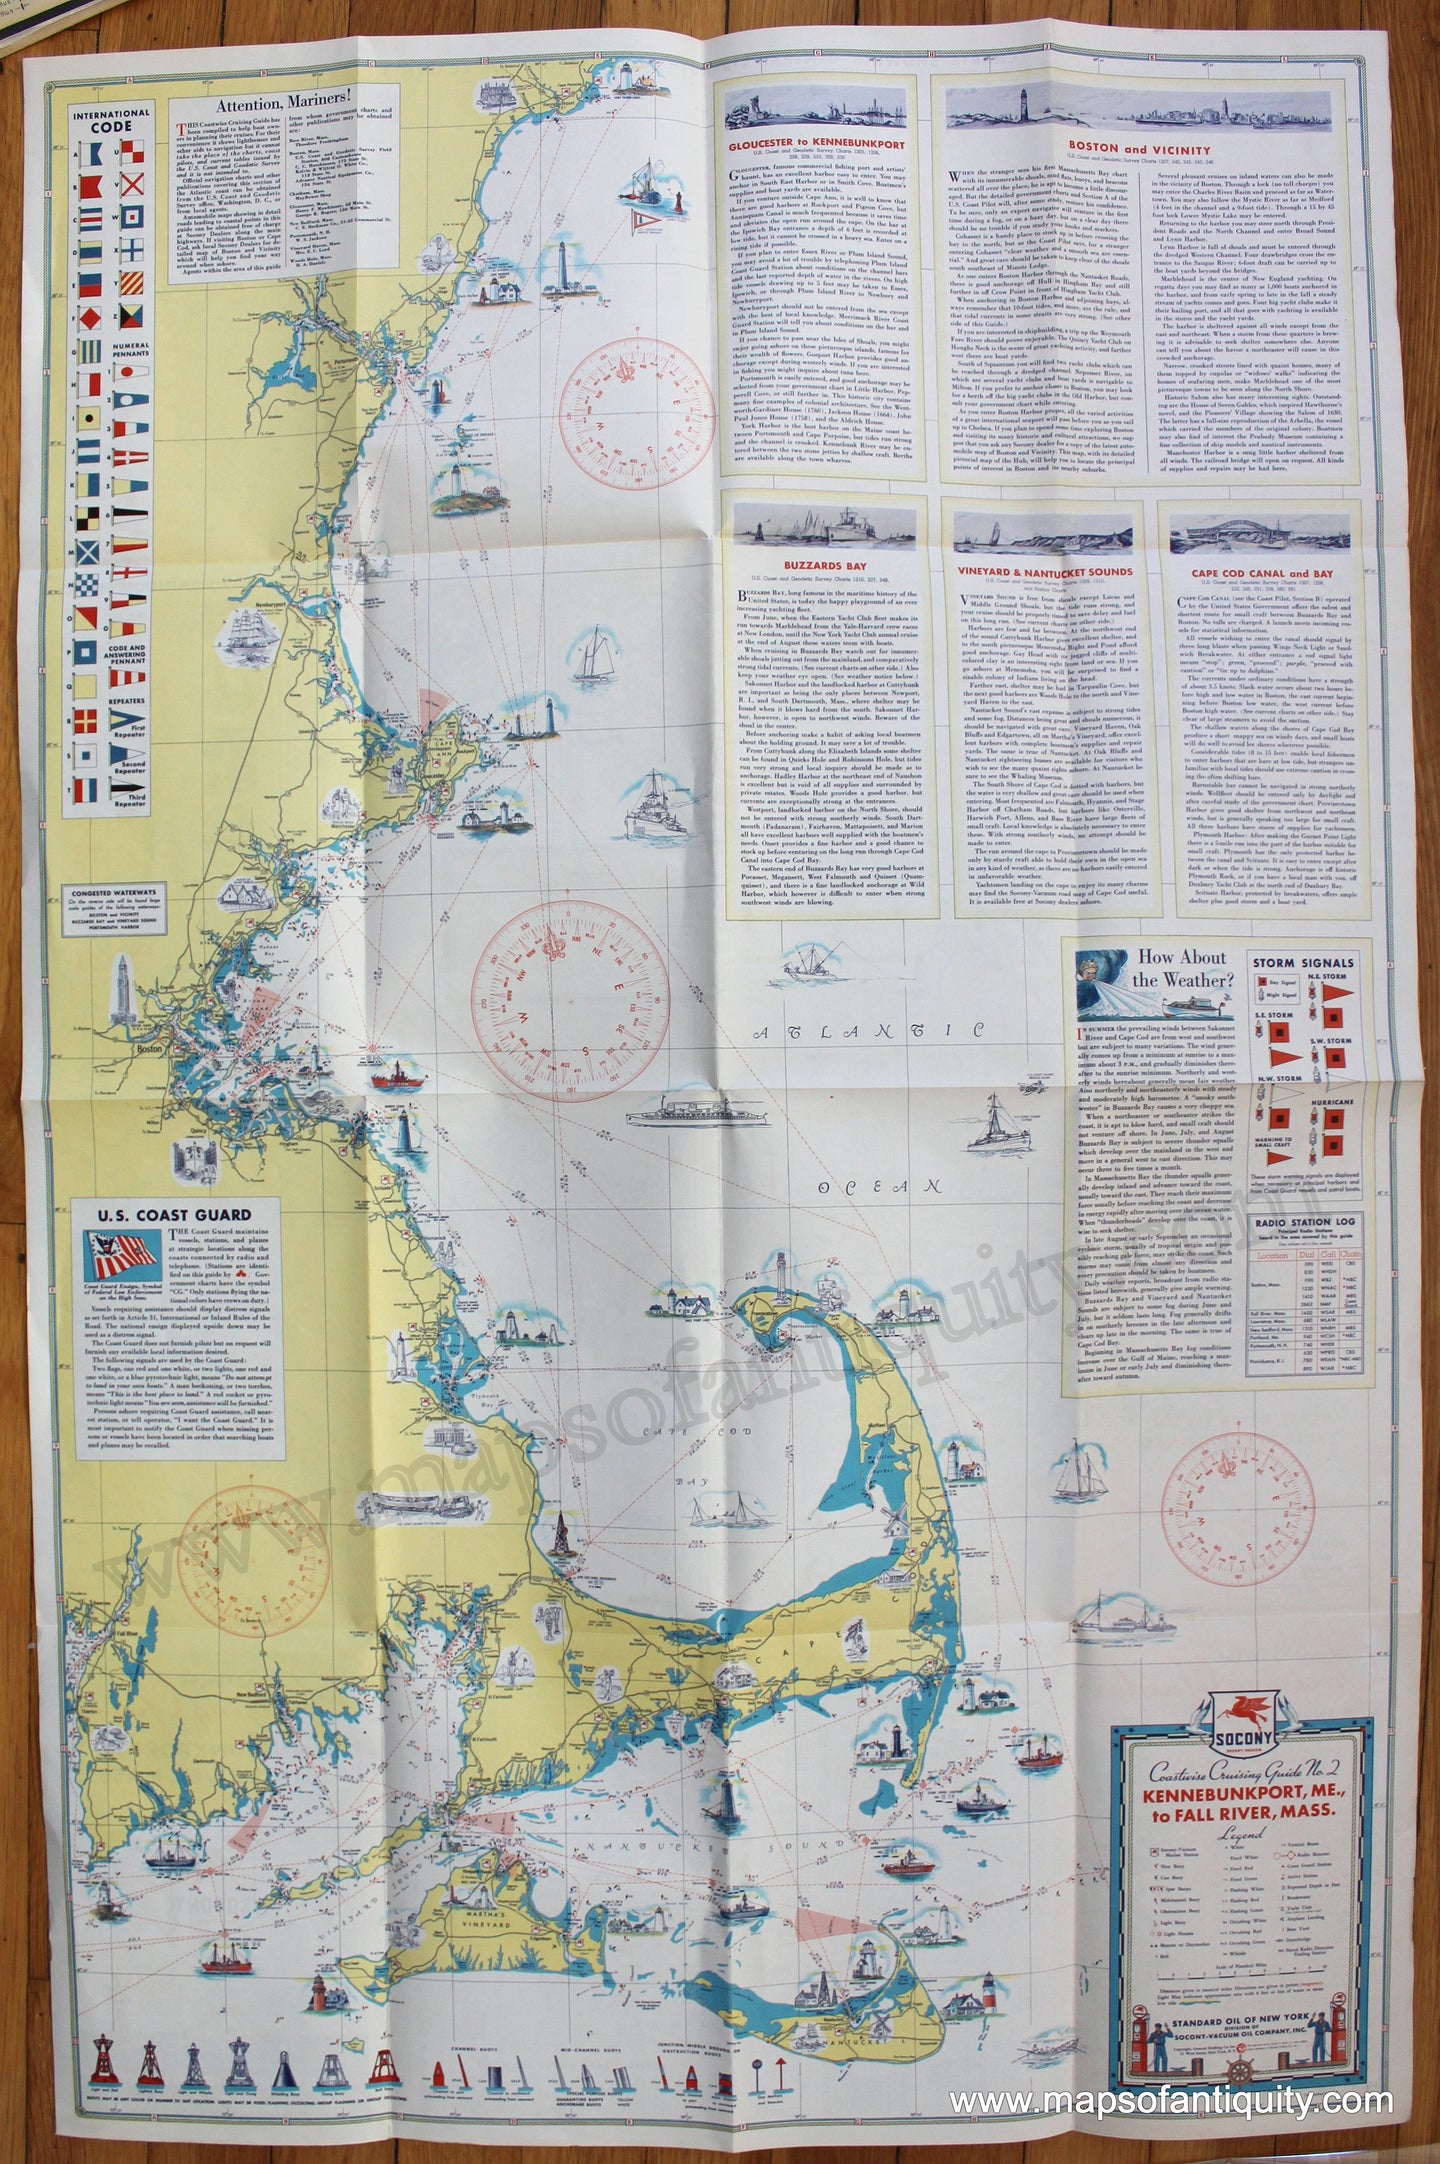 Antique-Pictorial-Chart-Coastwise-Cruising-Guide-Kennebunkport-ME.-to-Fall-River-MA.-1940s-Socony-Vacuum-Oil-/-Rand-McNally---1800s-19th-century-Maps-of-Antiquity